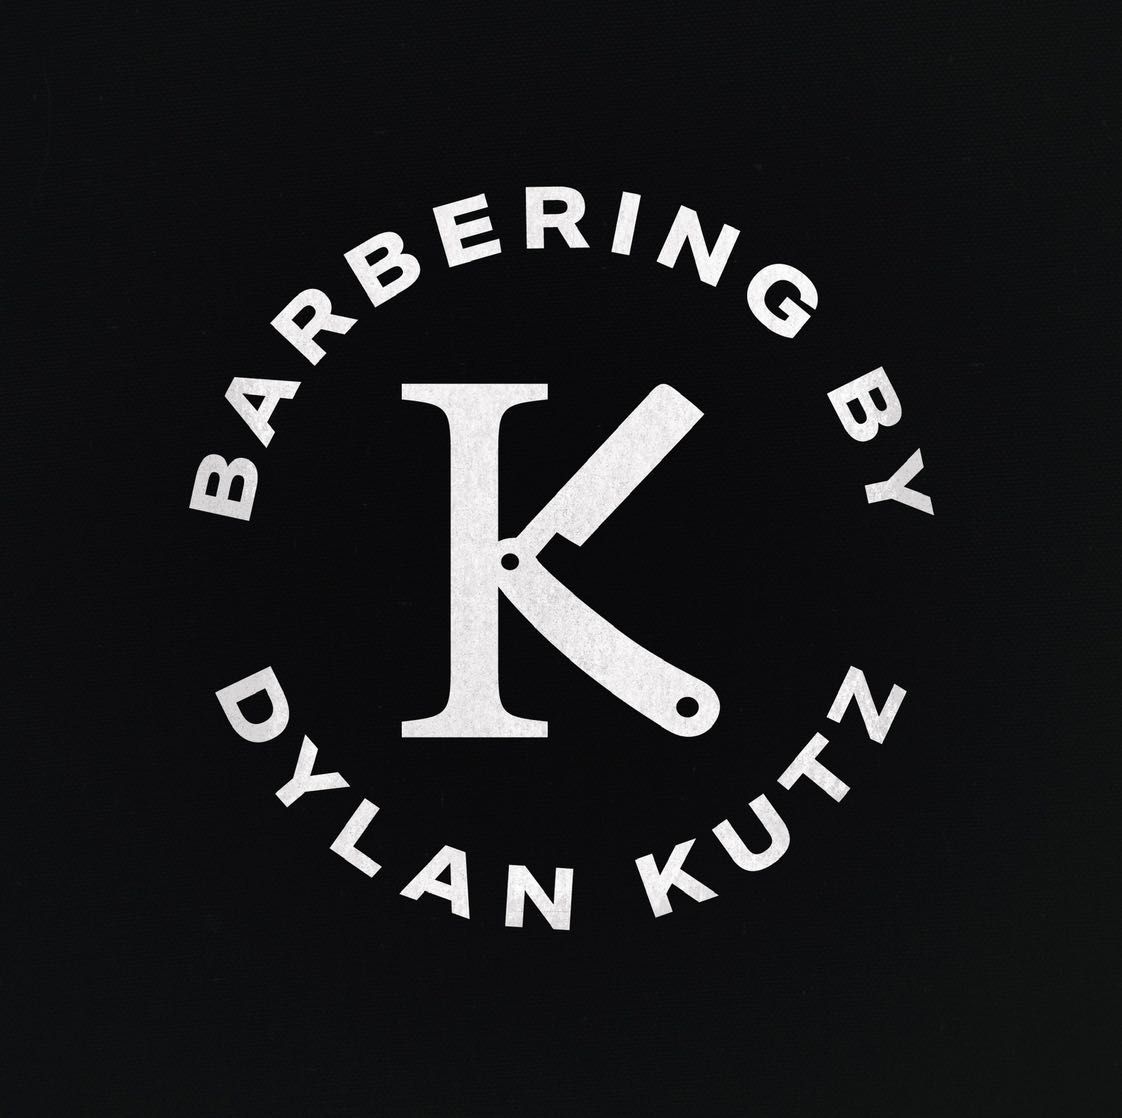 Barbering By Dylan Kutz, 1740 SE 58th Ave, Ocala, 34480